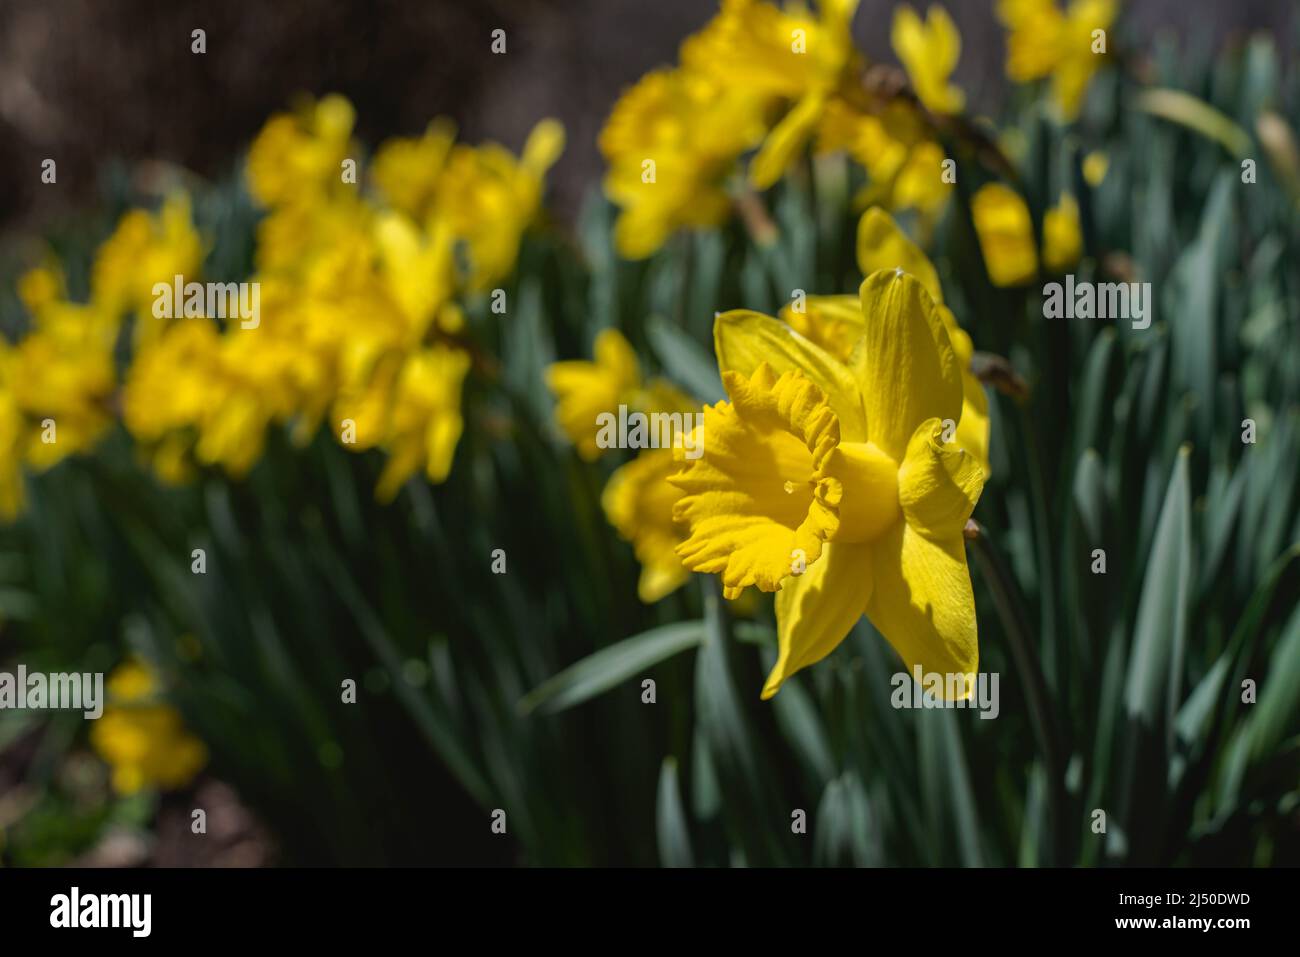 Daffodils pictured against a bright blue sky. Stock Photo